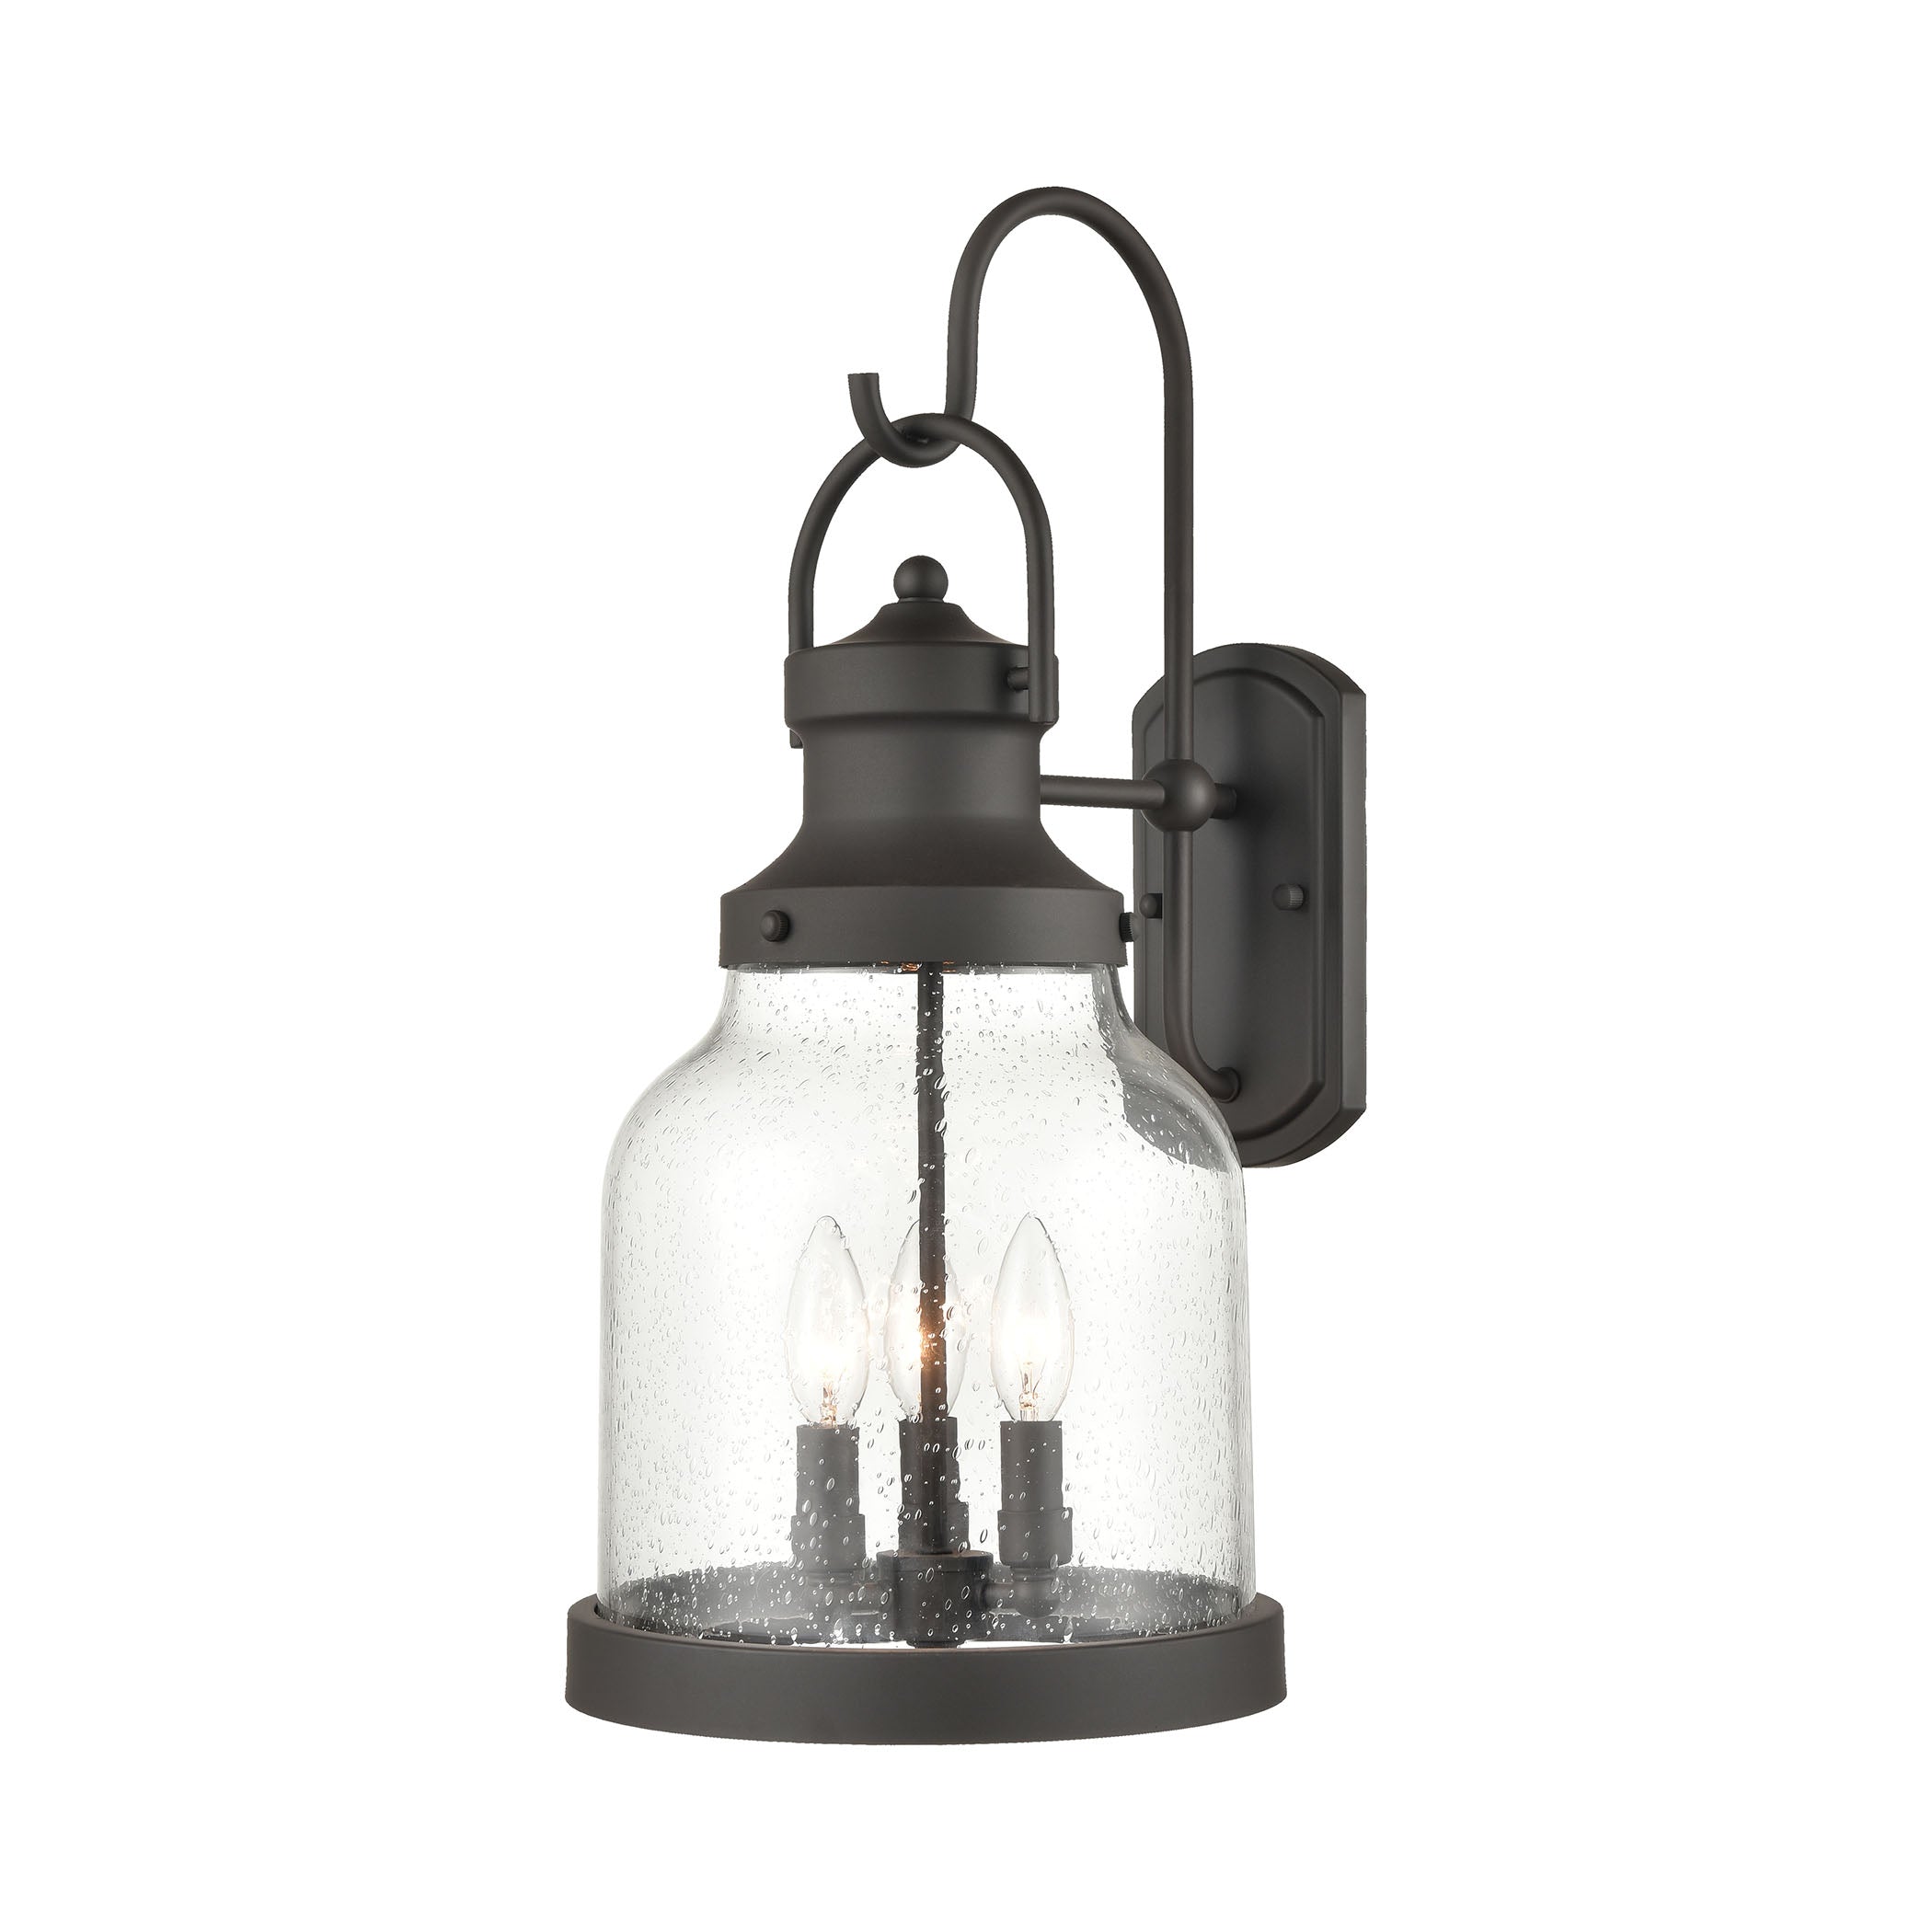 ELK Lighting 45422/3 Renford 3-Light Outdoor Sconce in Architectural Bronze with Seedy Glass